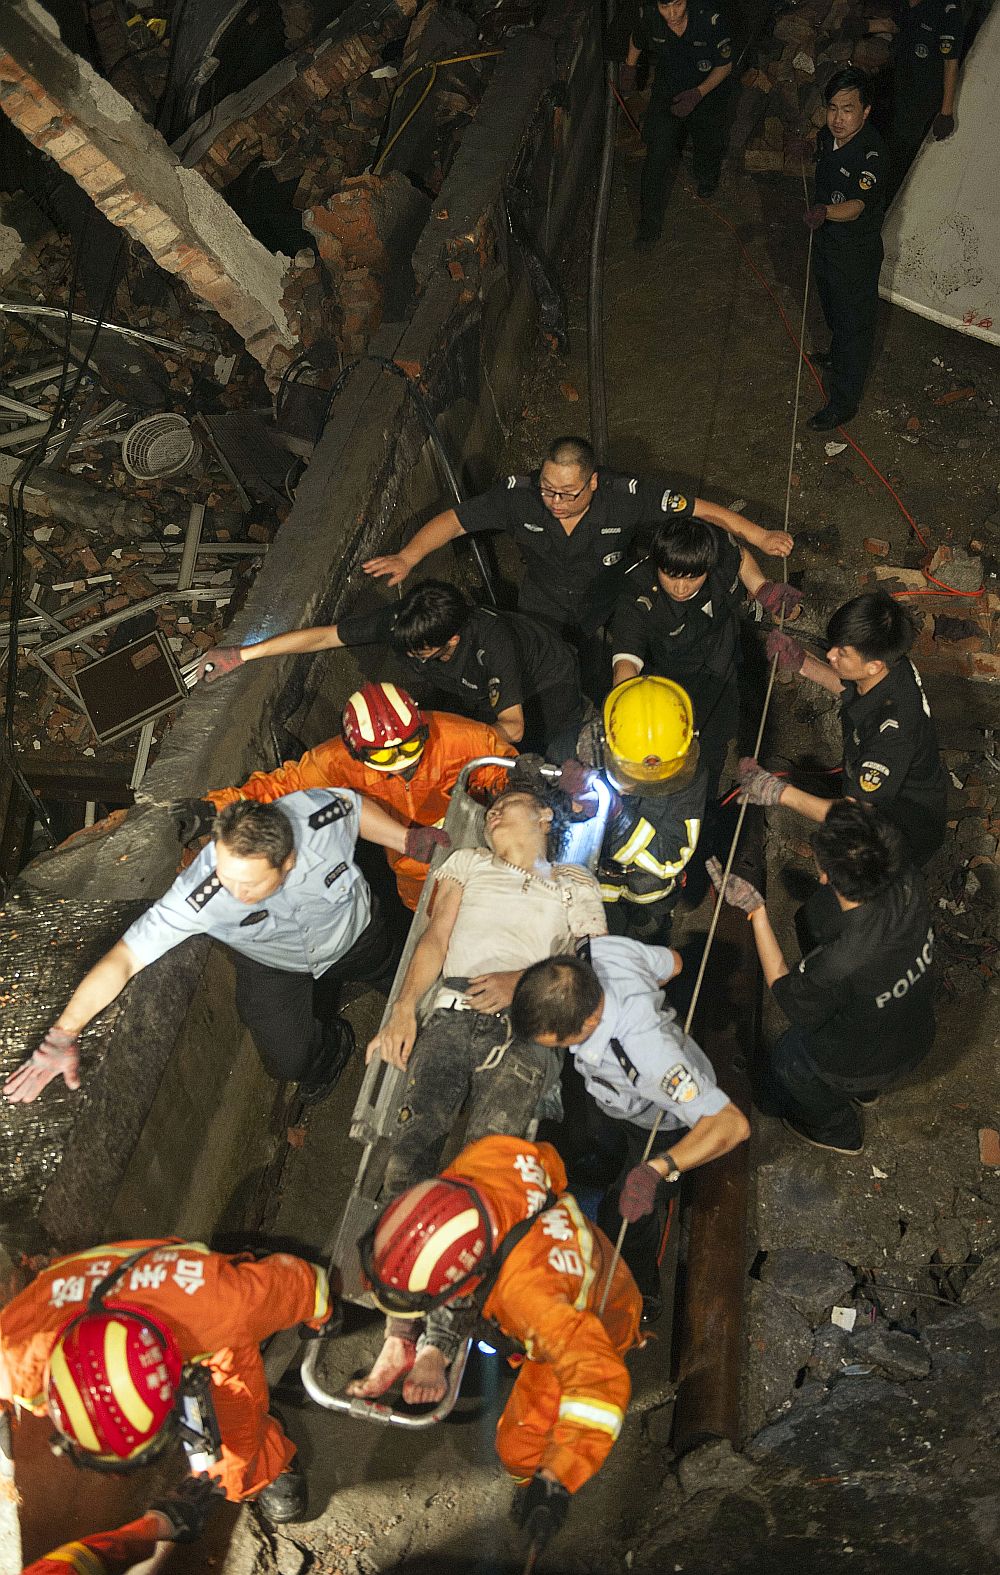  Rescuers use a stretcher to evacuate a victim from the rubble of a factory building in Wenling city in eastern China’s Zhejiang province. (AP)